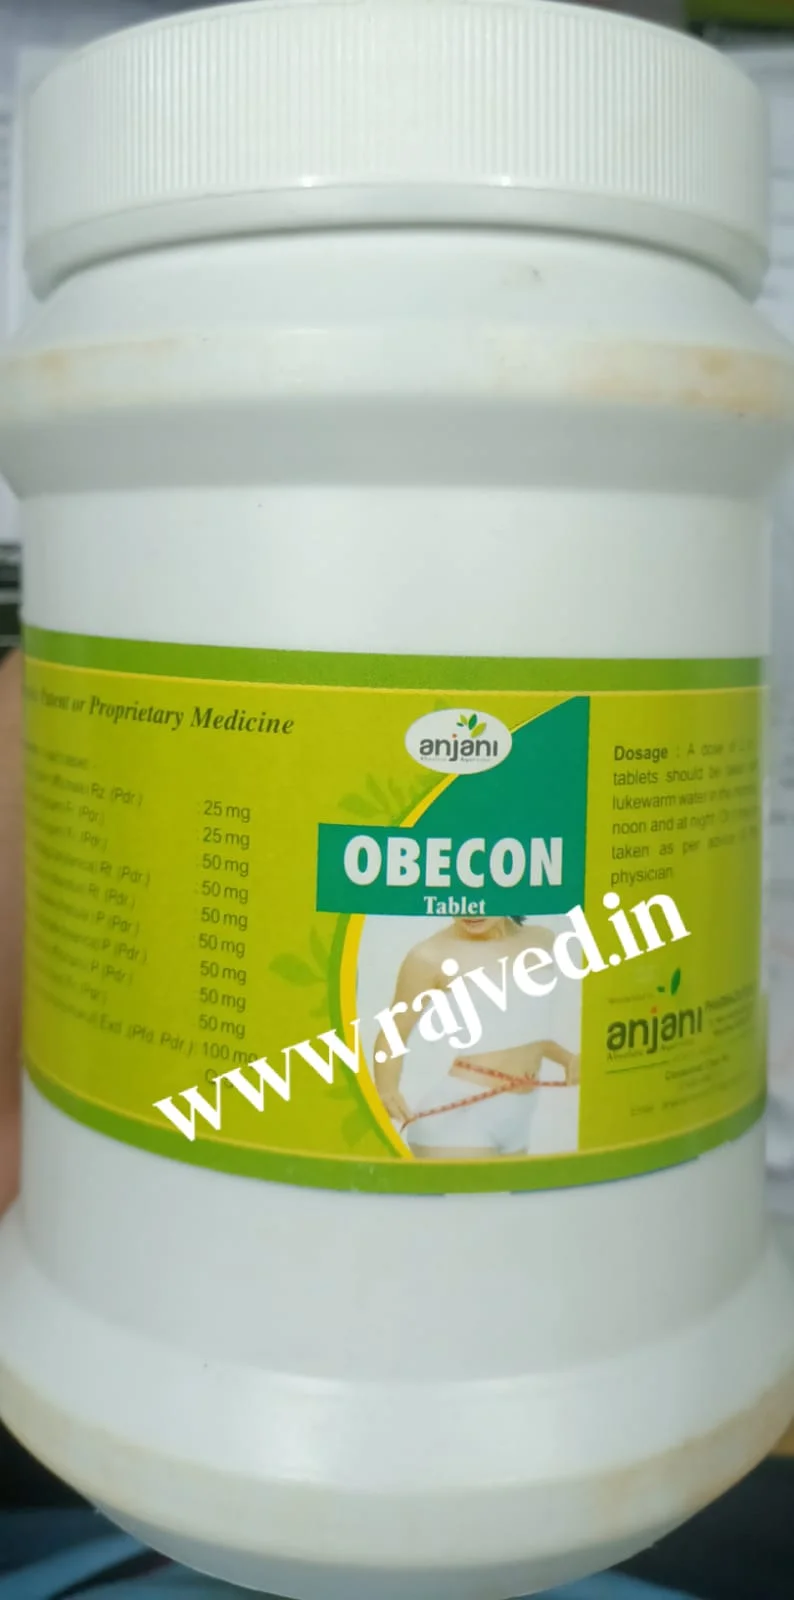 obecon tablet 100 tab upto 20% off Anjani Pharmaceuticals